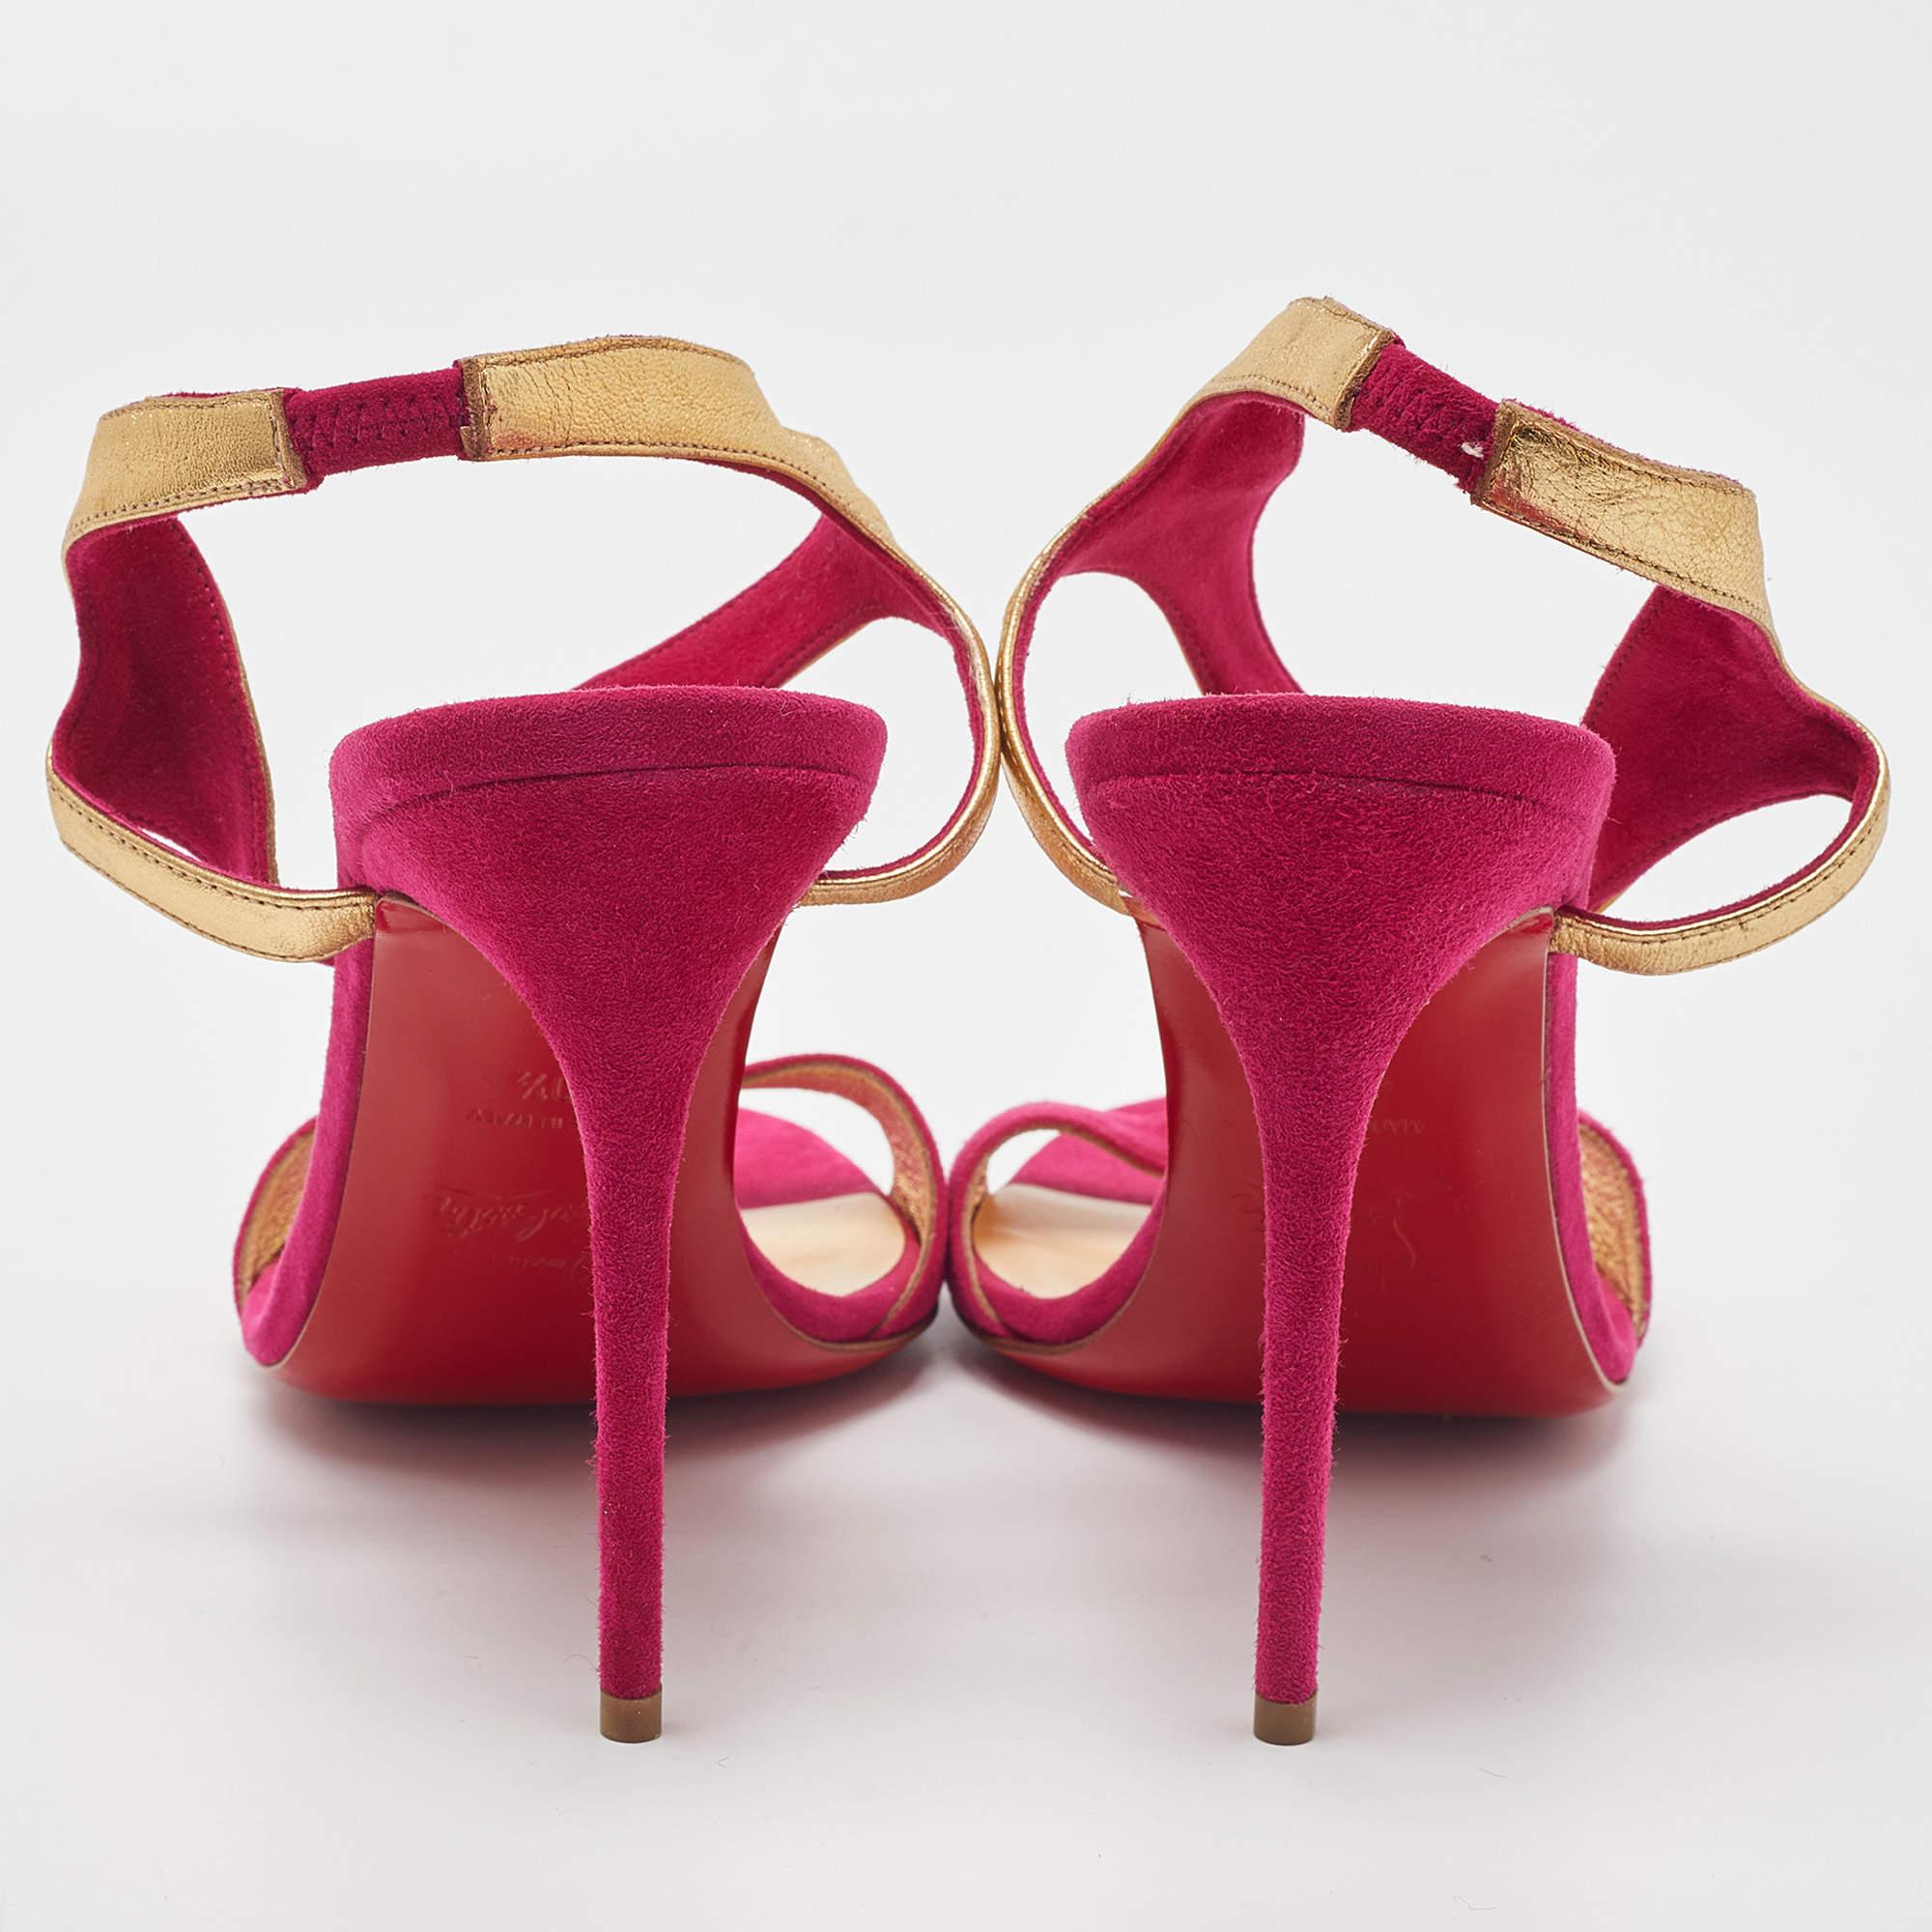 Christian Louboutin Pink/Gold Suede and Leather Morphetina Sandals Size 40.5 In New Condition For Sale In Dubai, Al Qouz 2